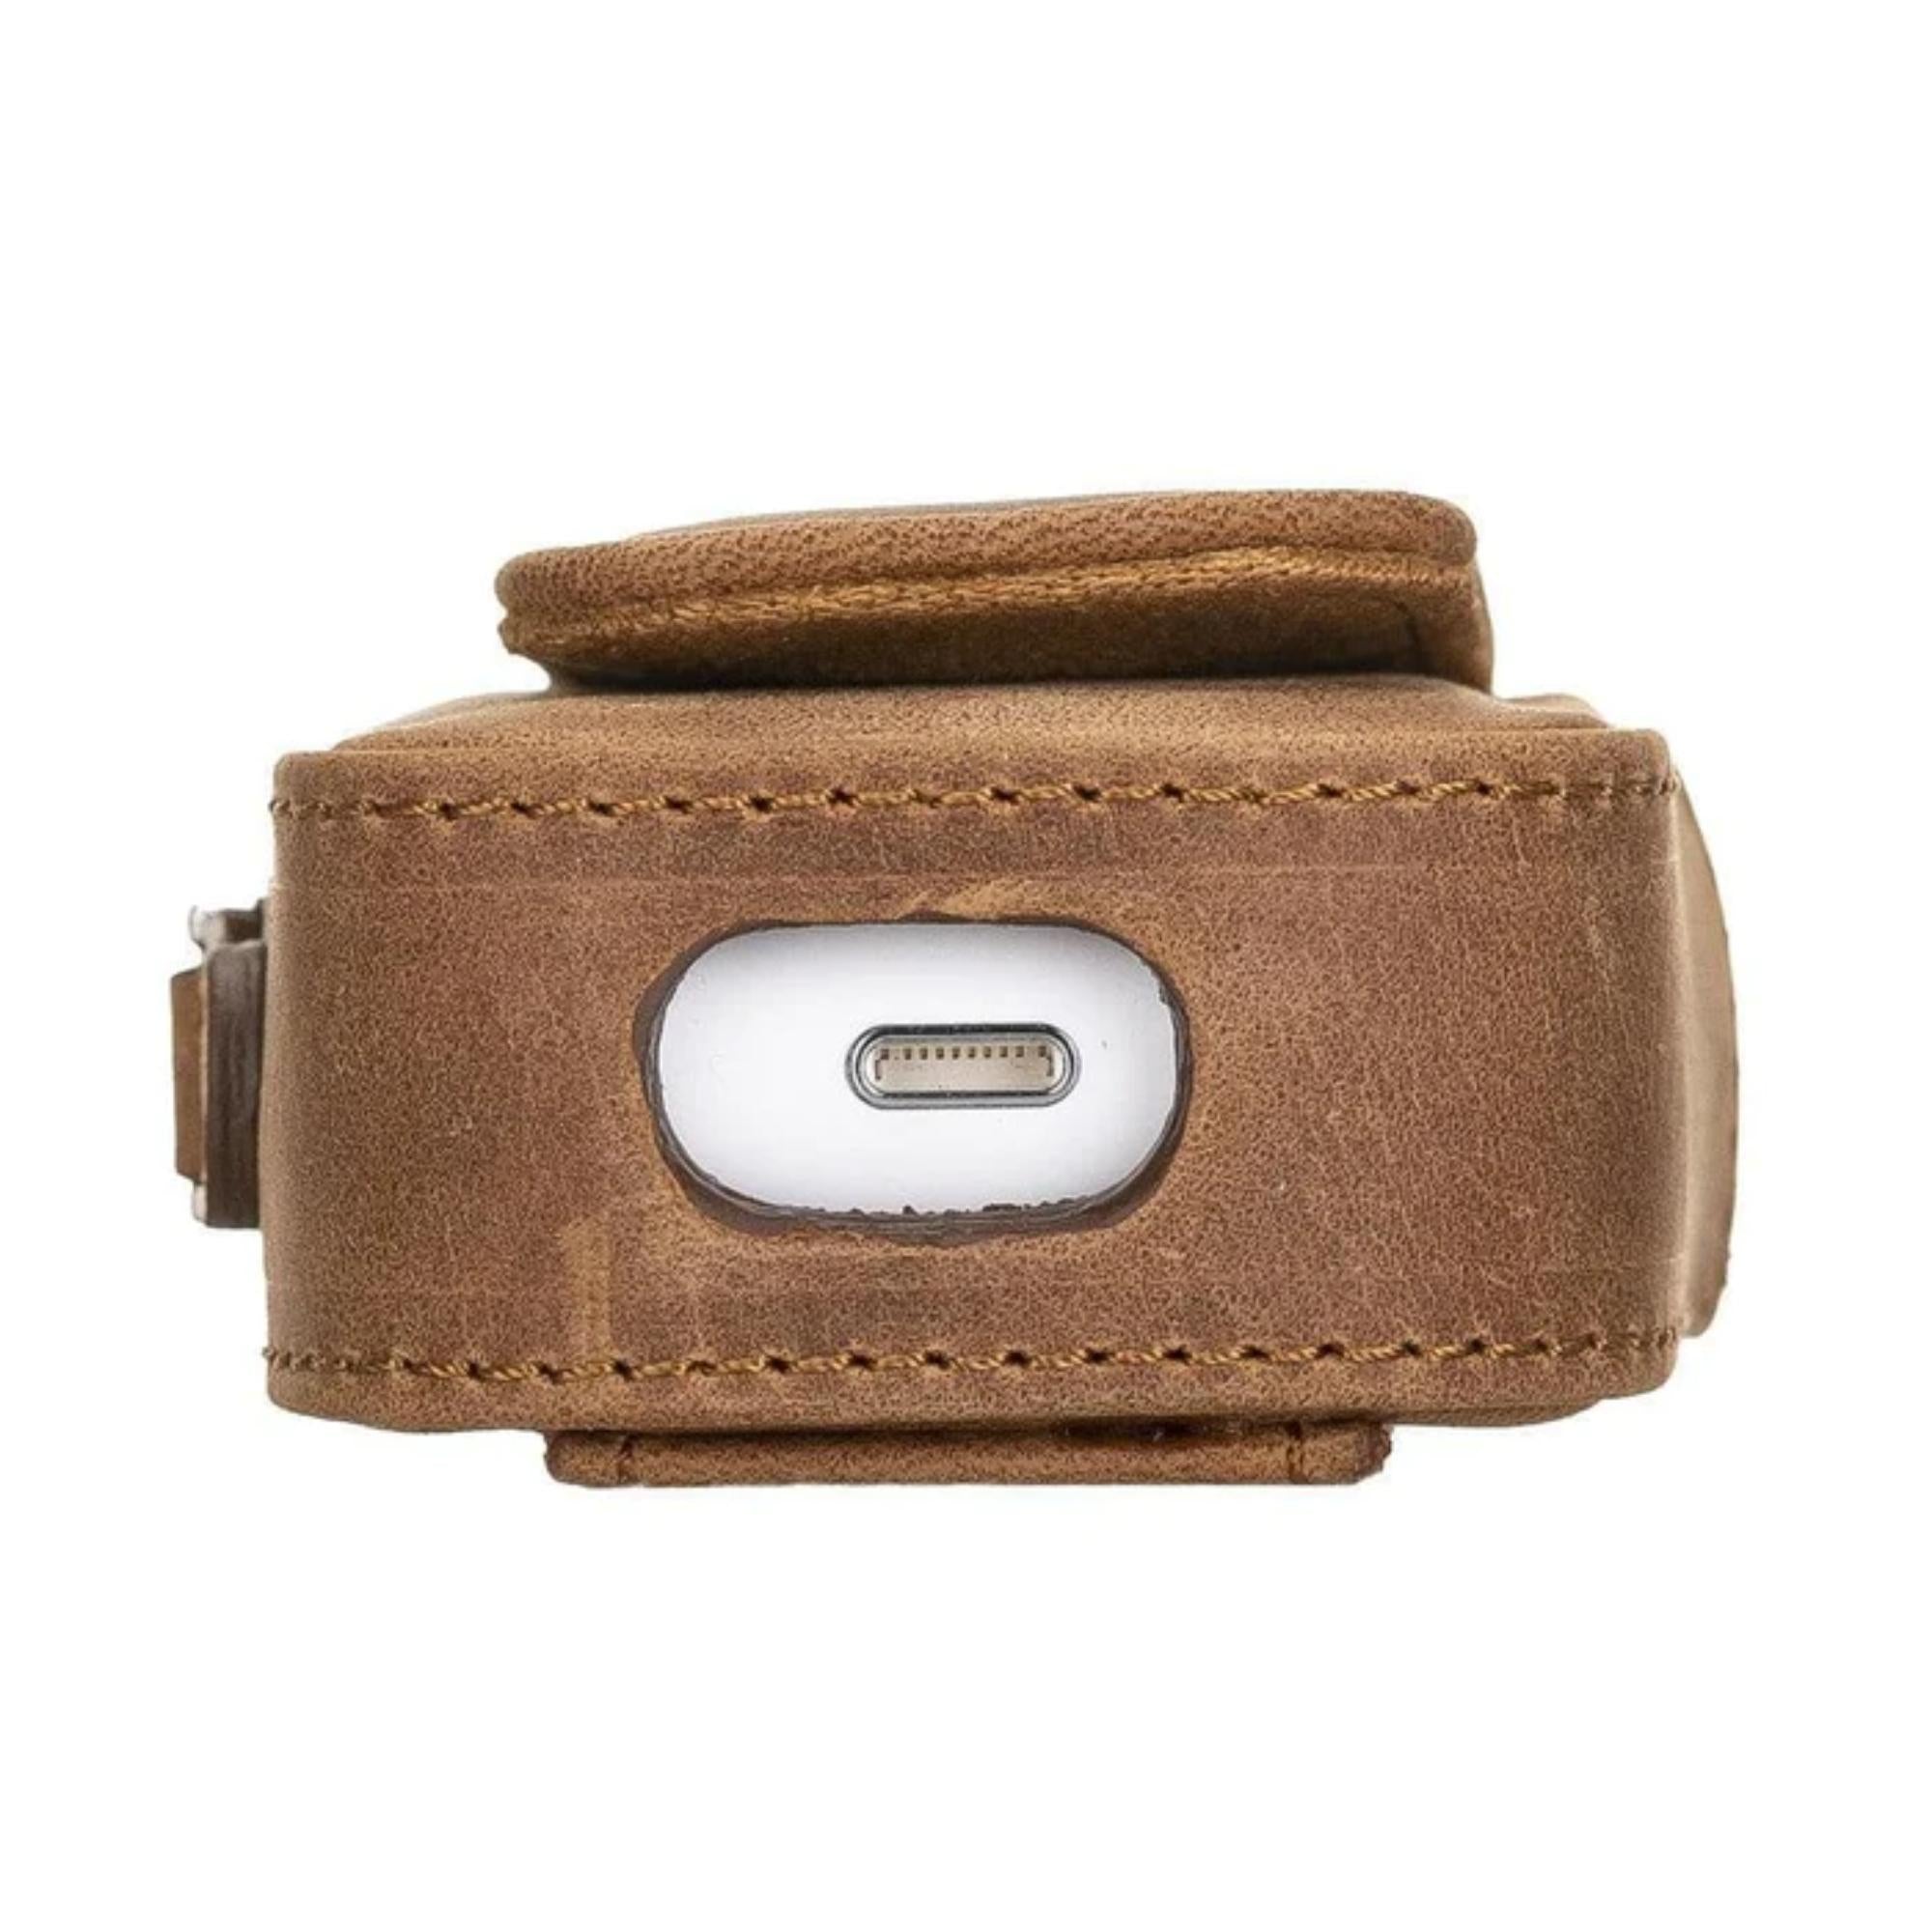 Aurora Luxury Leather AirPods Case with Attached Wrist Strap-Brown-AirPods 3-2-1 Generation--TORONATA